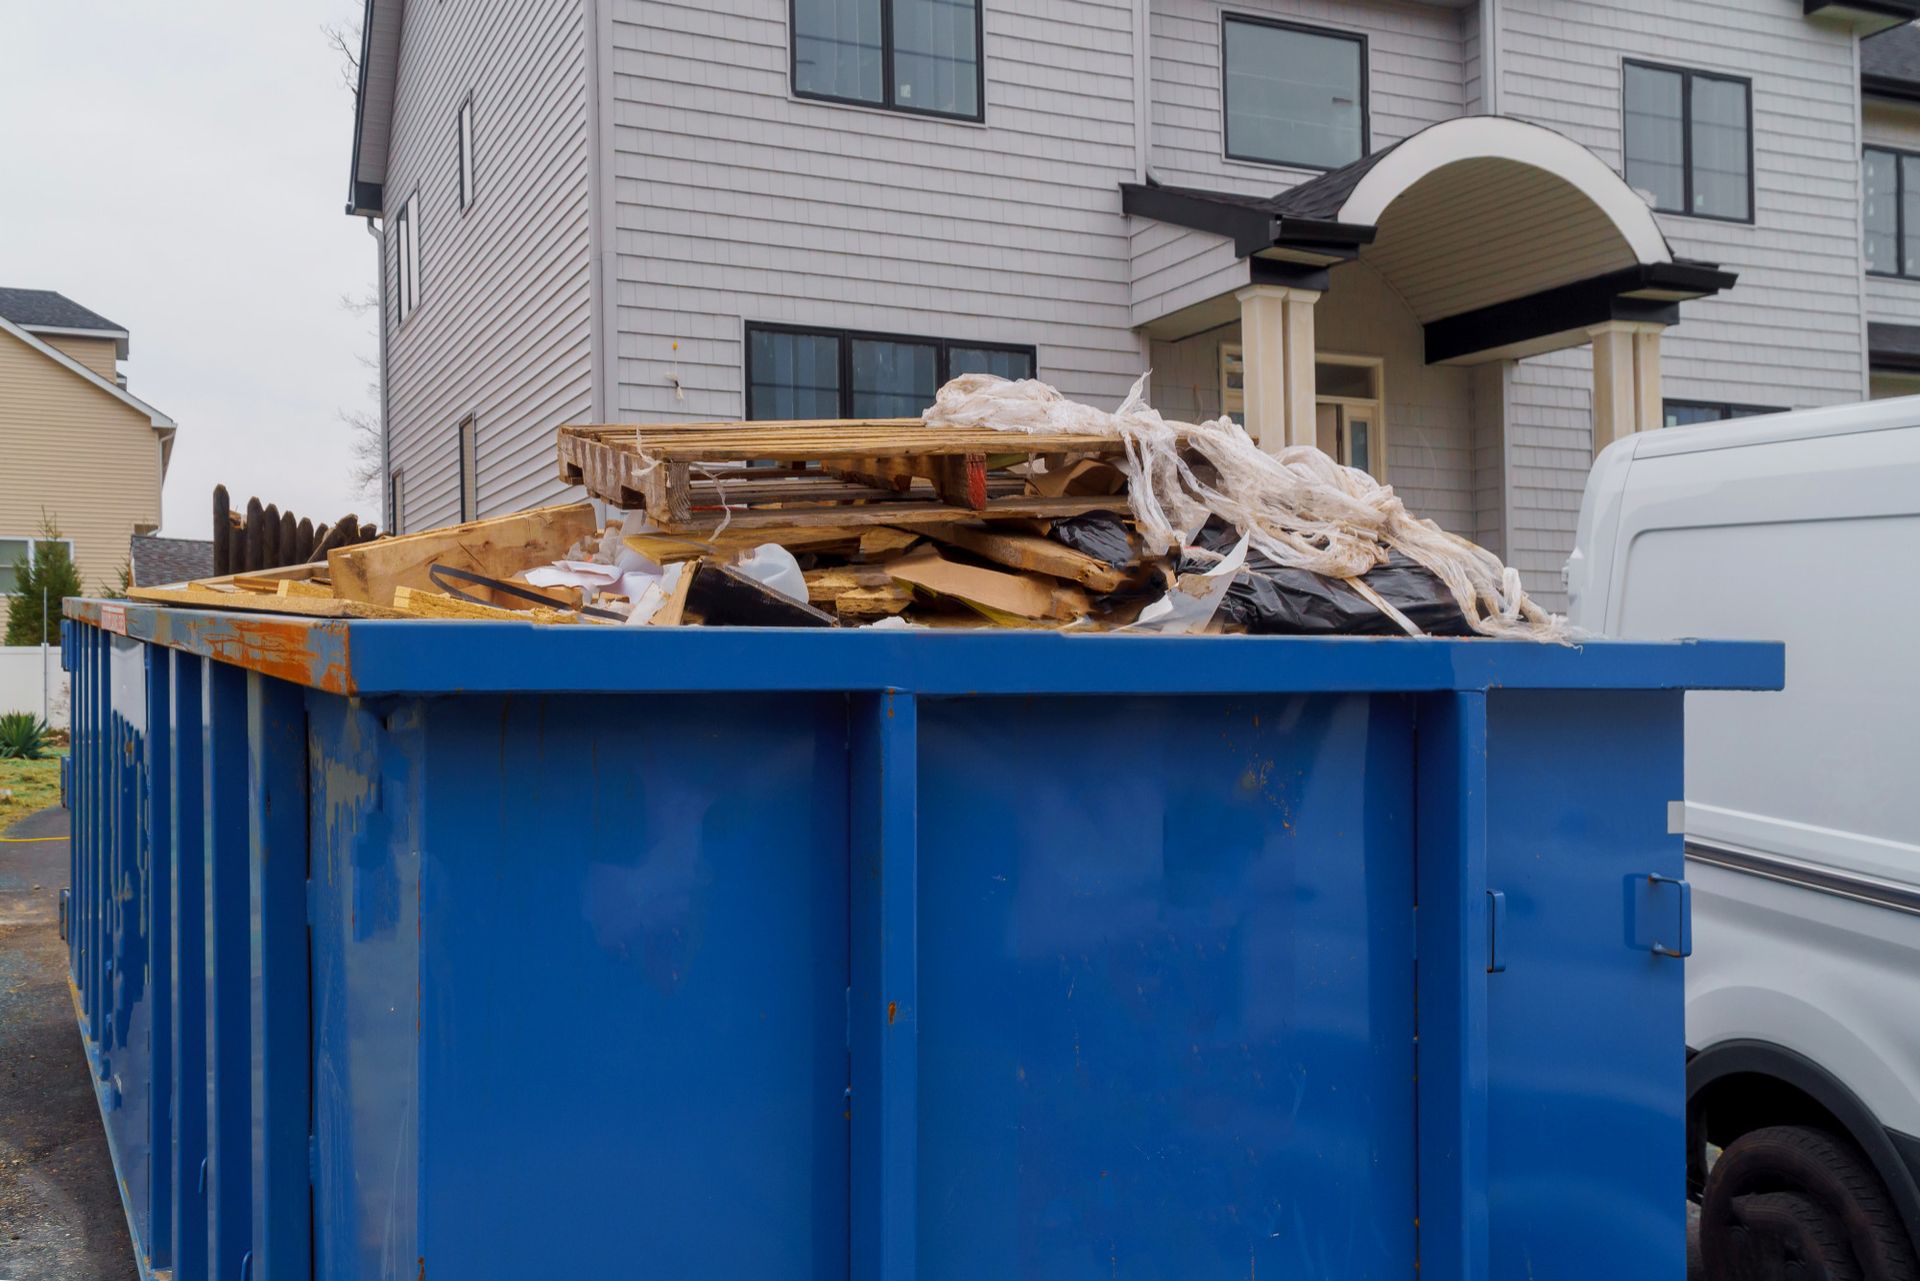 A large blue dumpster is sitting in front of a house.